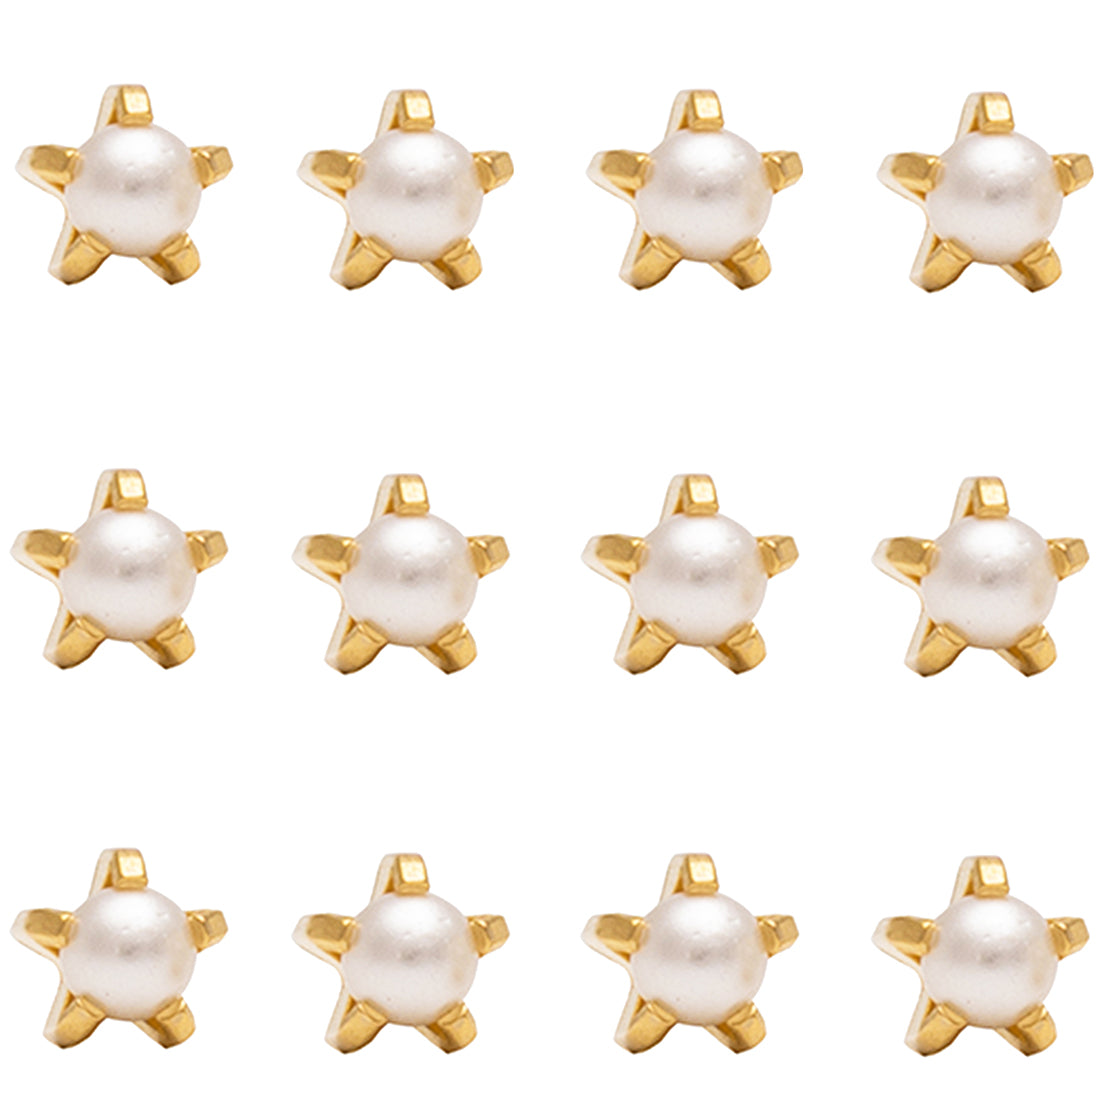 4MM Pearl 24K Pure Gold Plated Piercing Ear Stud (12 Pair)